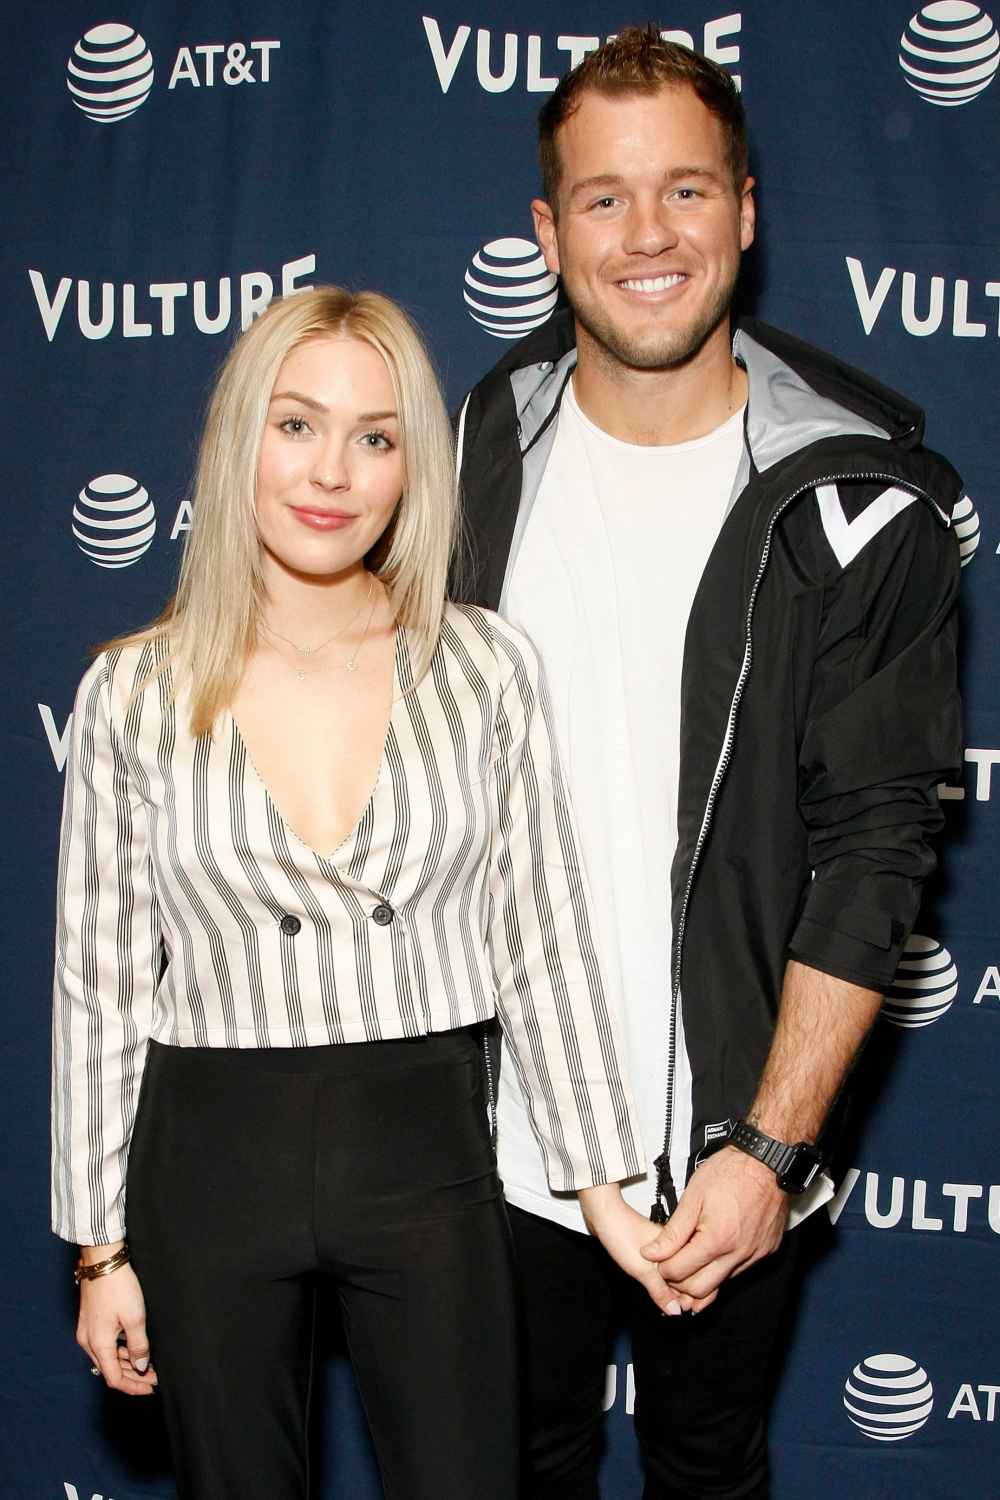 Cassie Randolph Speaks Out About ‘Awful Months’ After Breakup With Colton Underwood